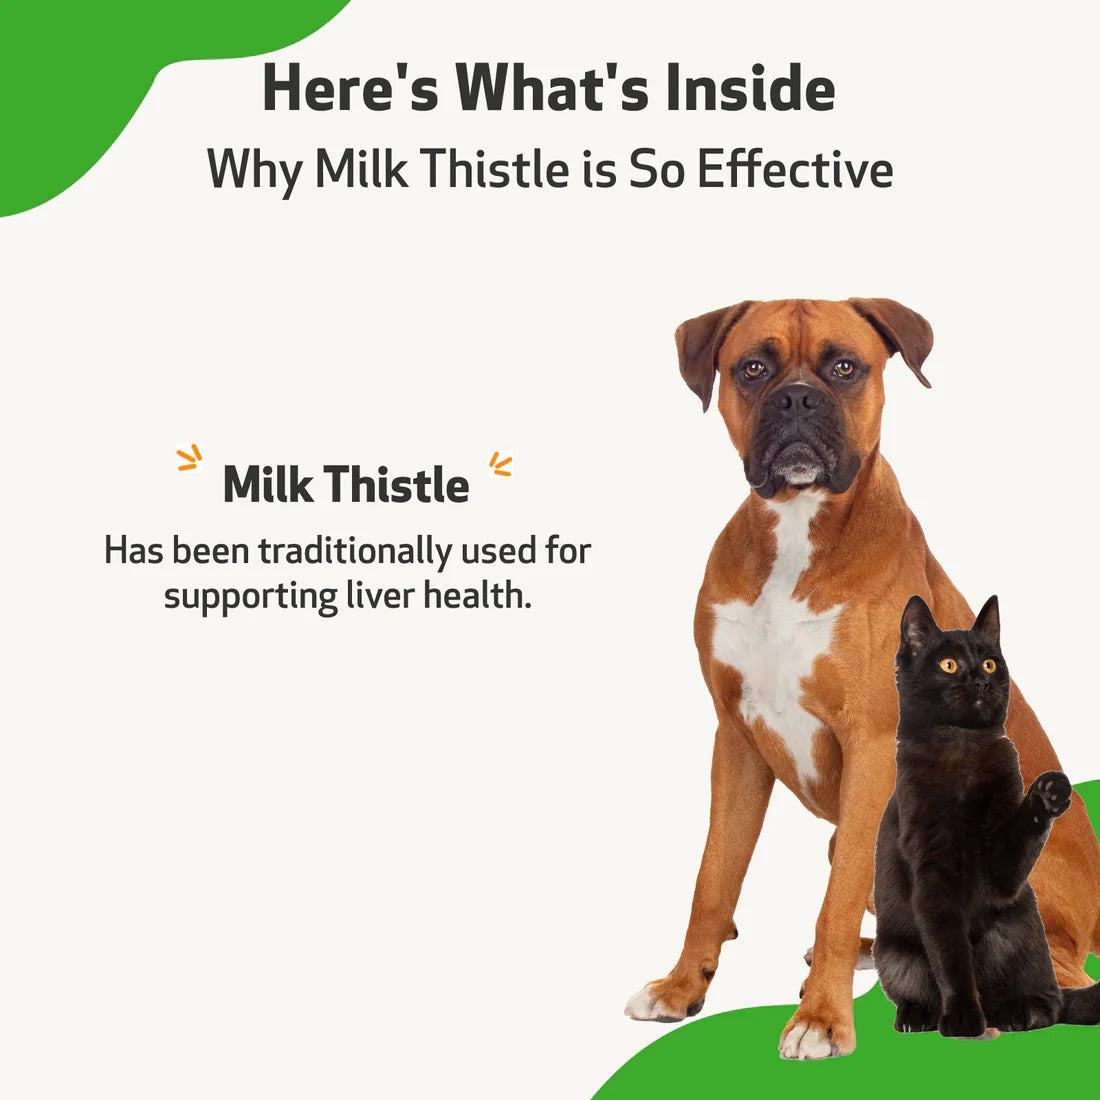 Pet Wellbeing - Milk Thistle - for Healthy Liver Function in Cats & Dogs